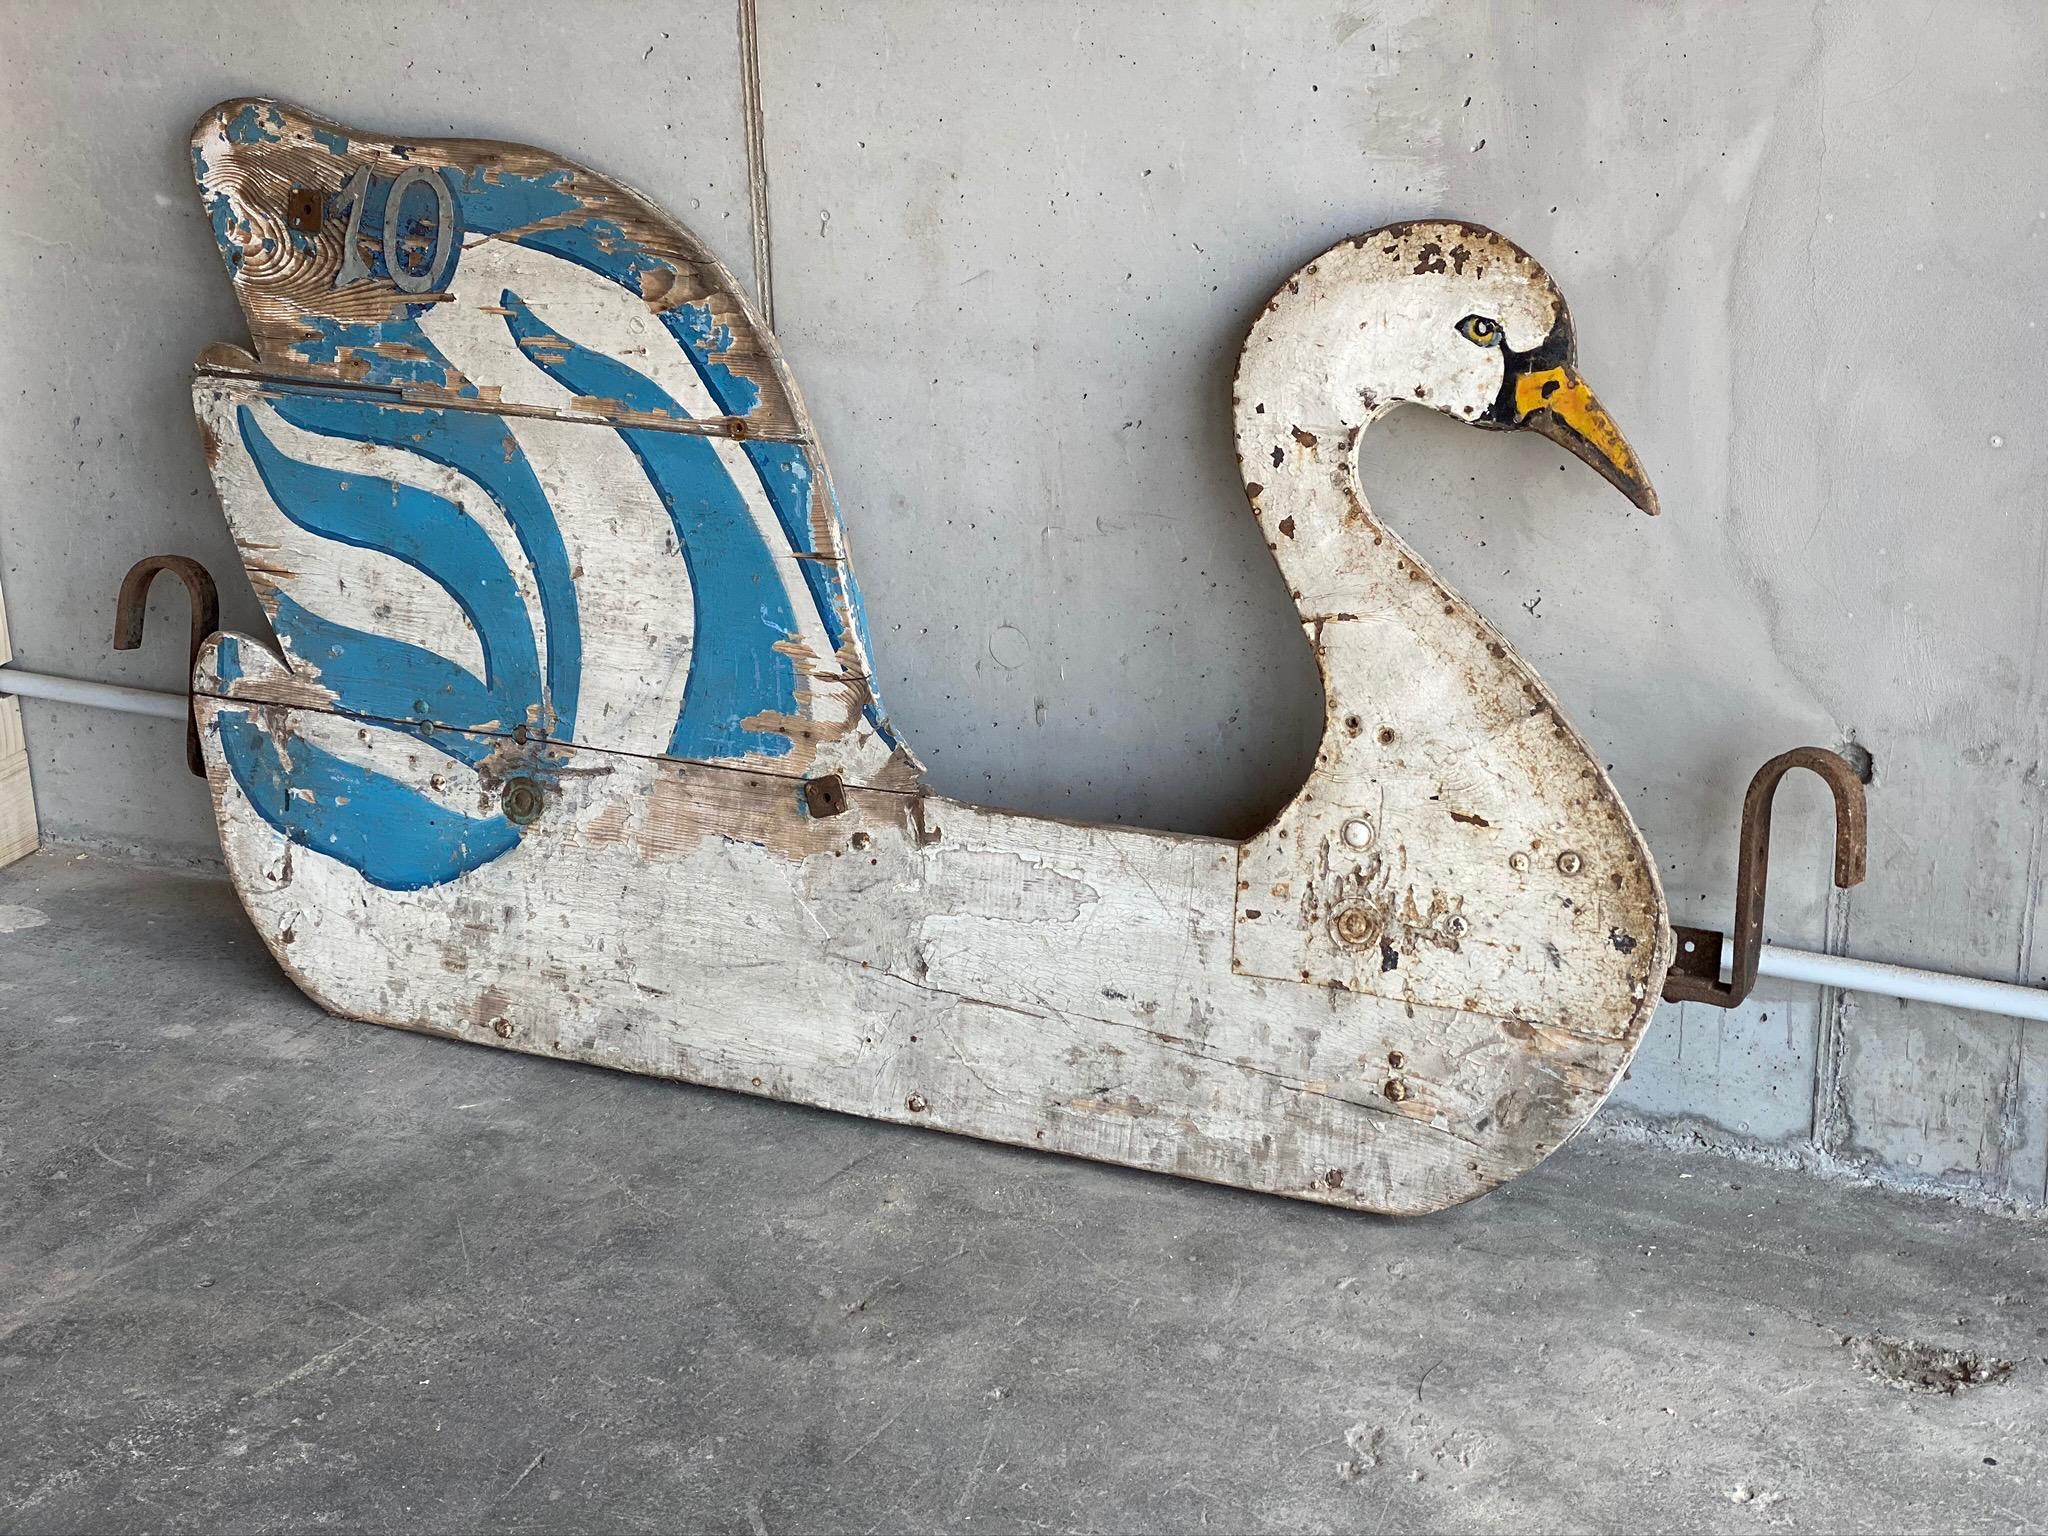 Early 20th Century Swan Art Deco Side Panel of Carousel Wagon, France 1920s, Decorative Object